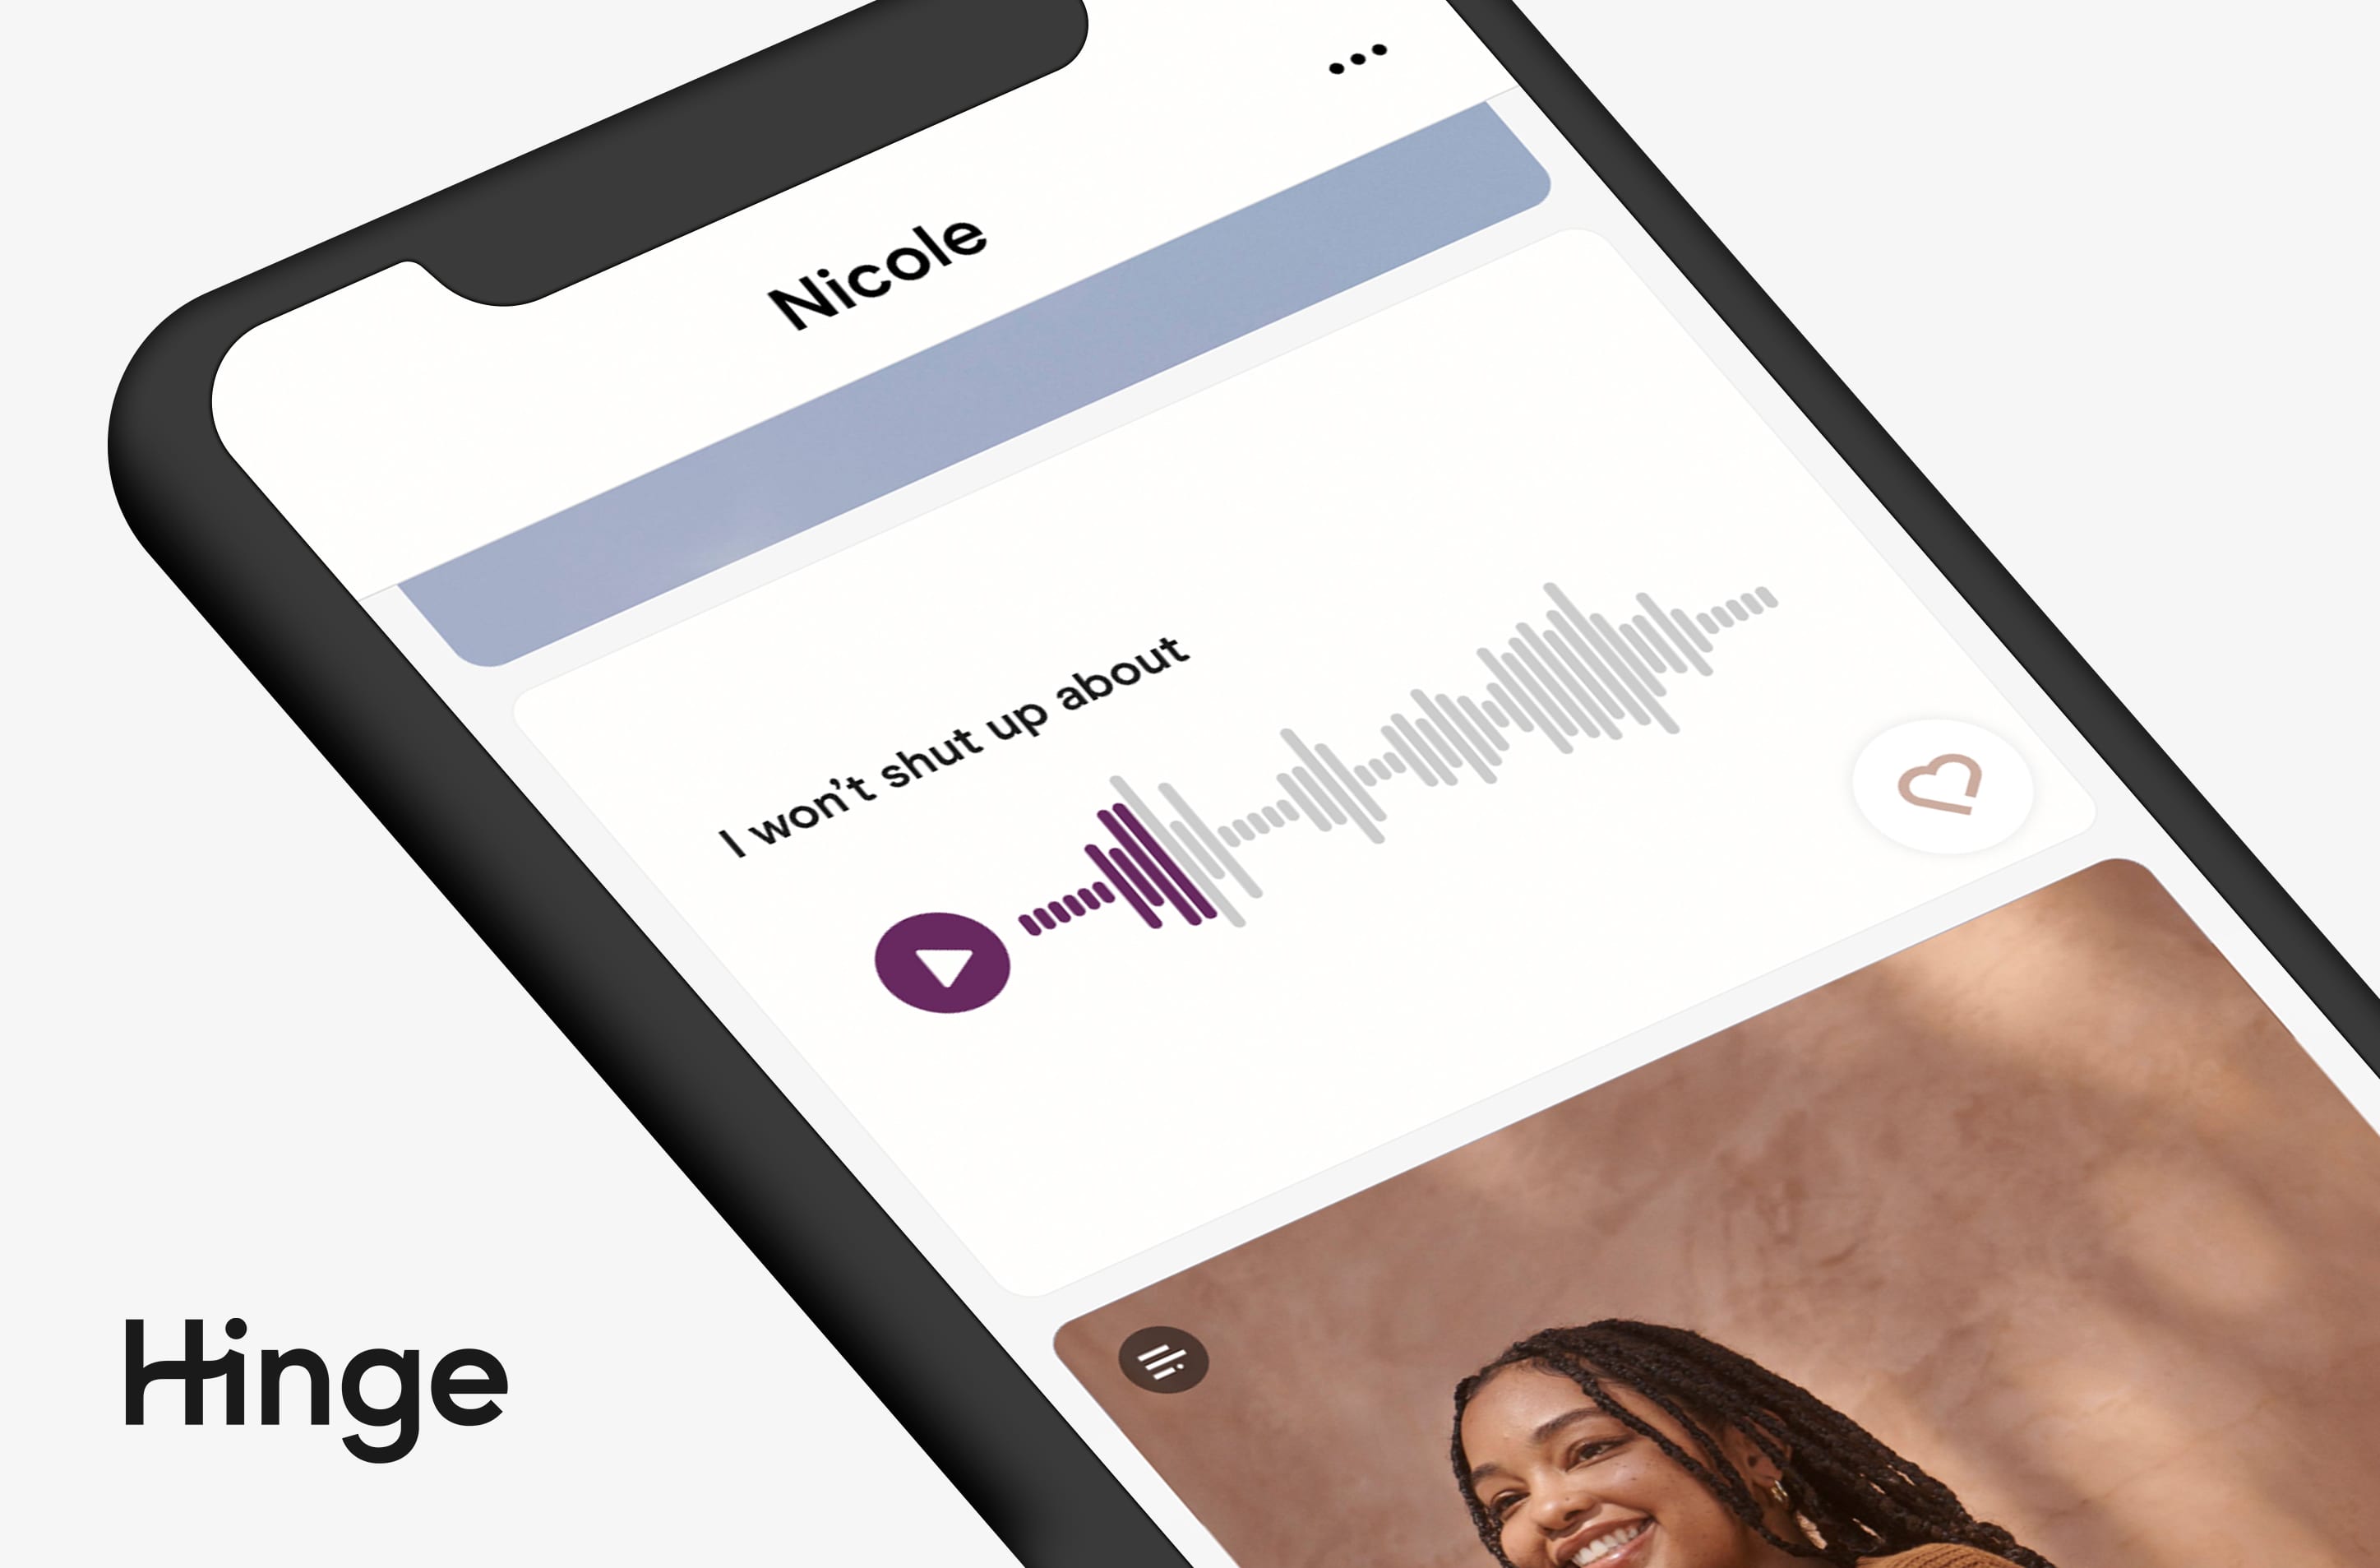 Dating app Hinge is betting big on audio as Match Group pushes for a